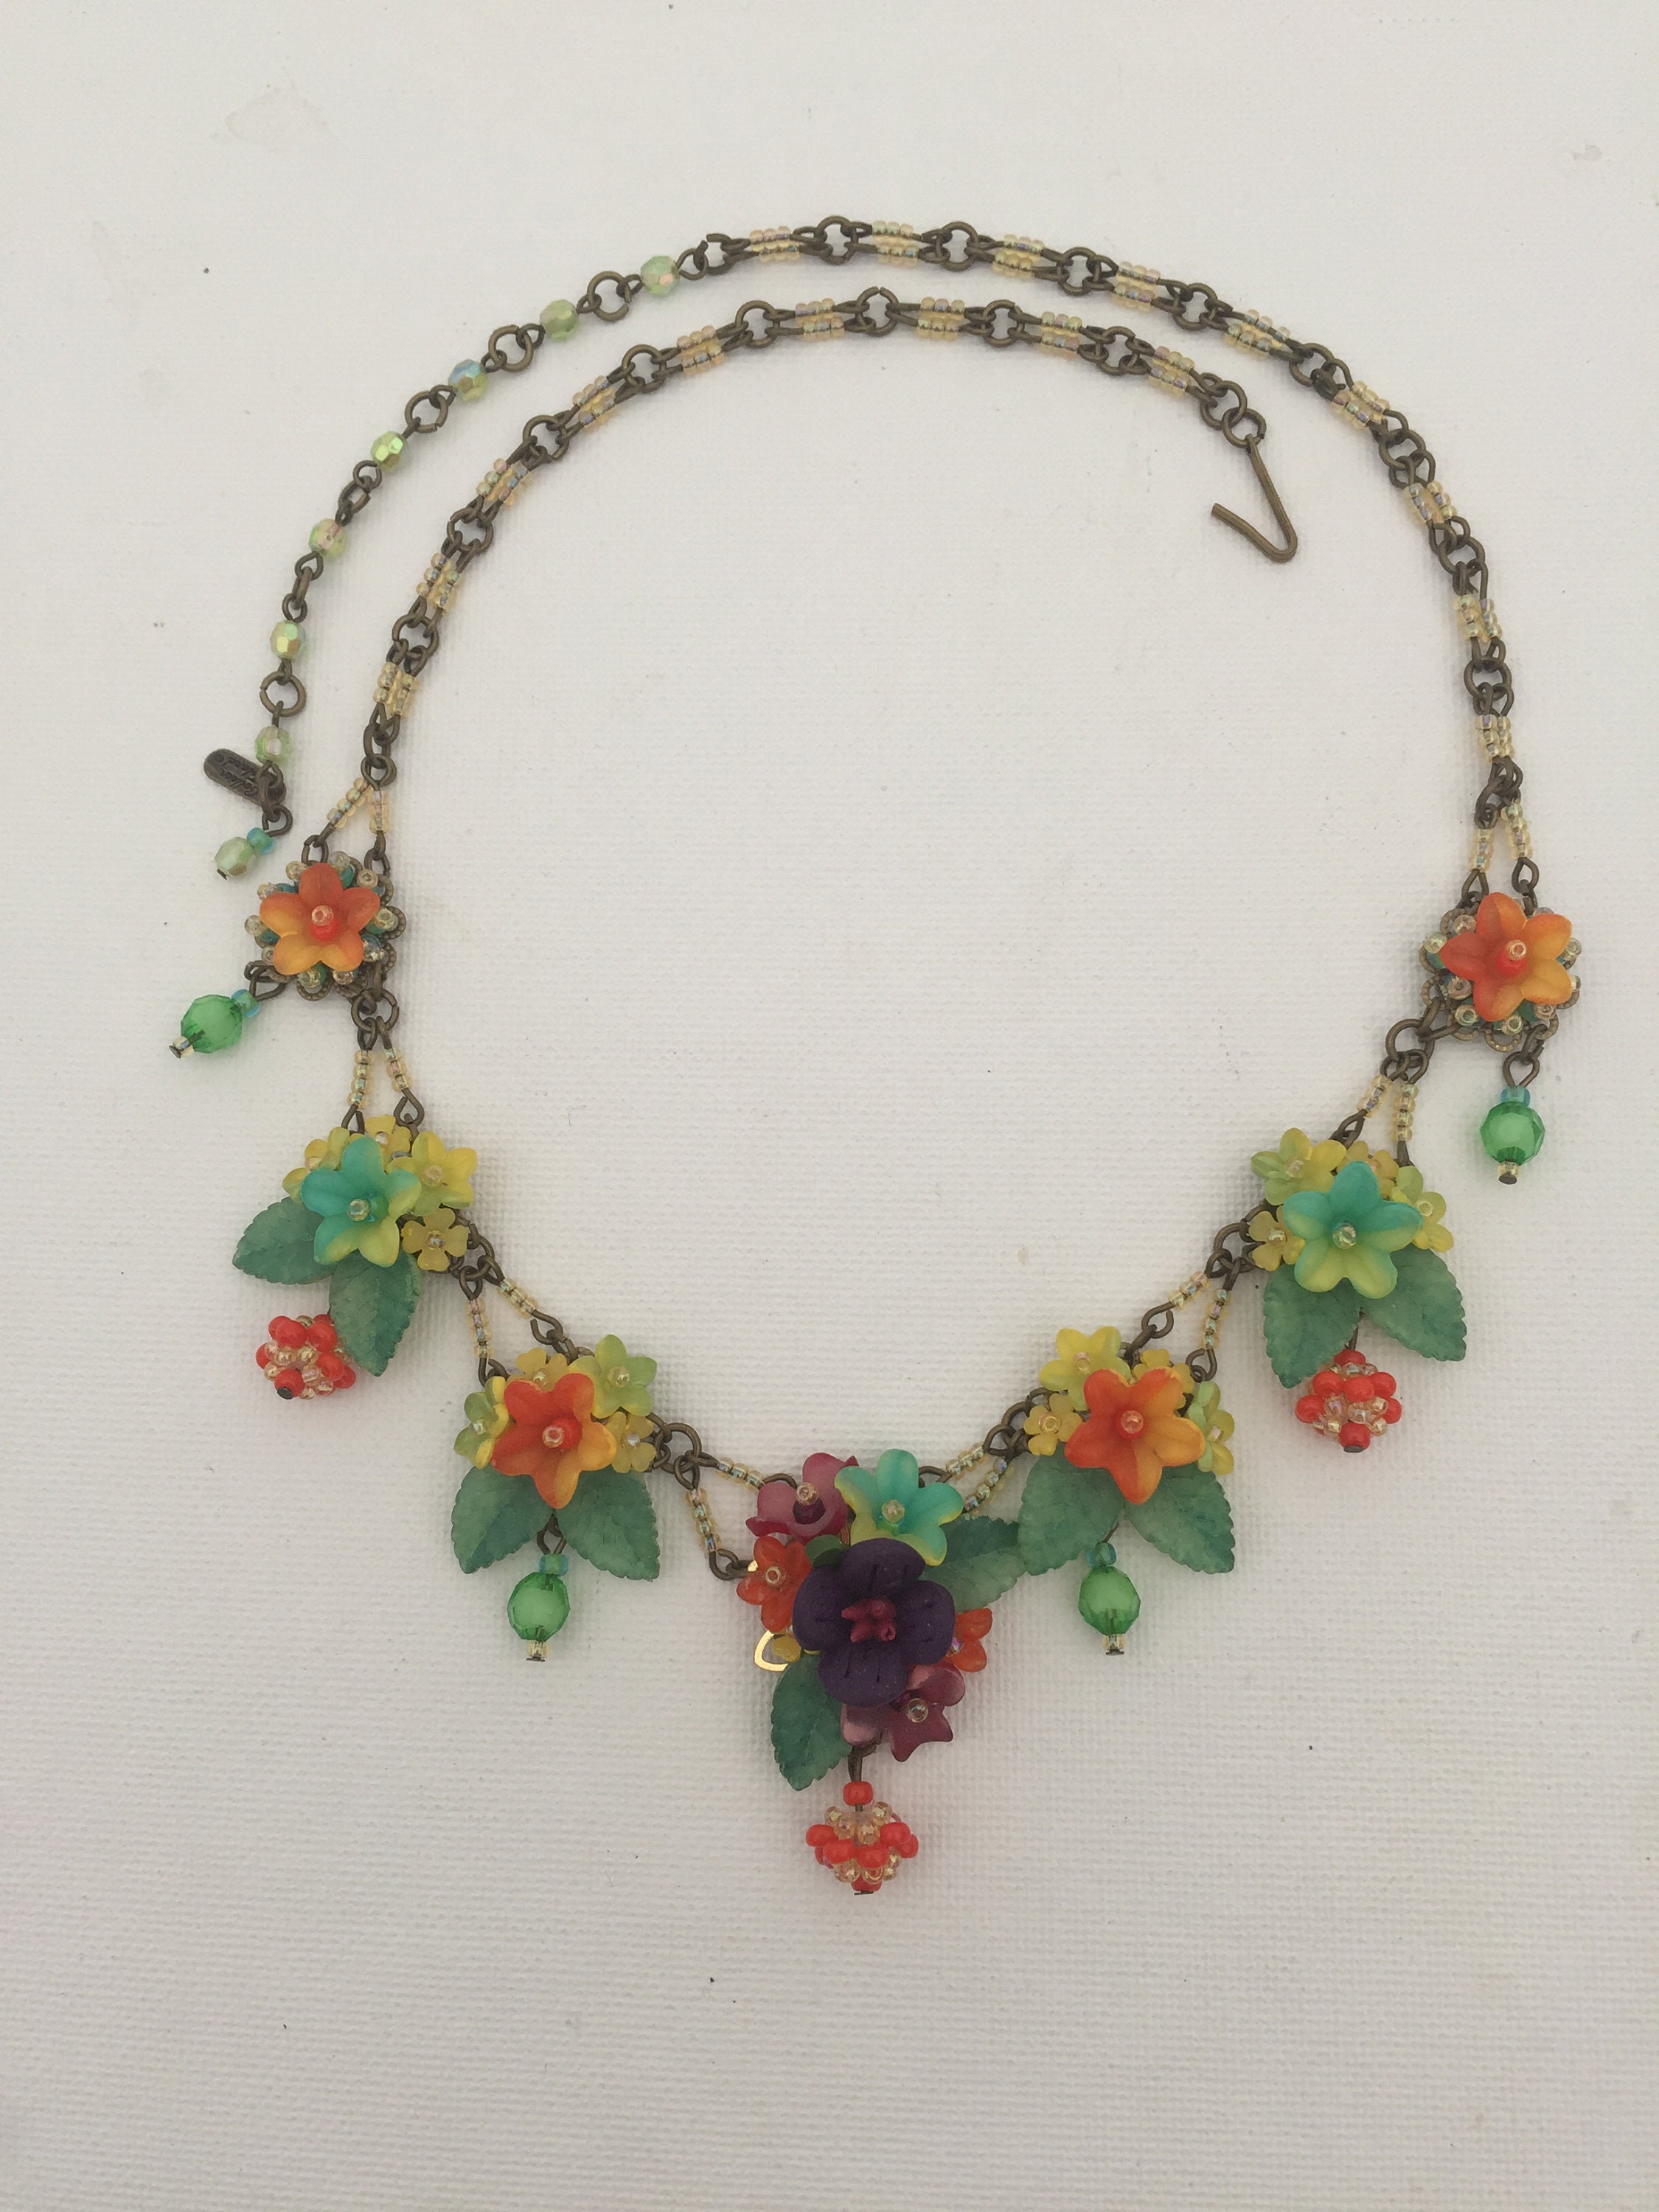 STUNNING MULTI COLOR Necklace Hand Beaded by Designer Colleen - Etsy